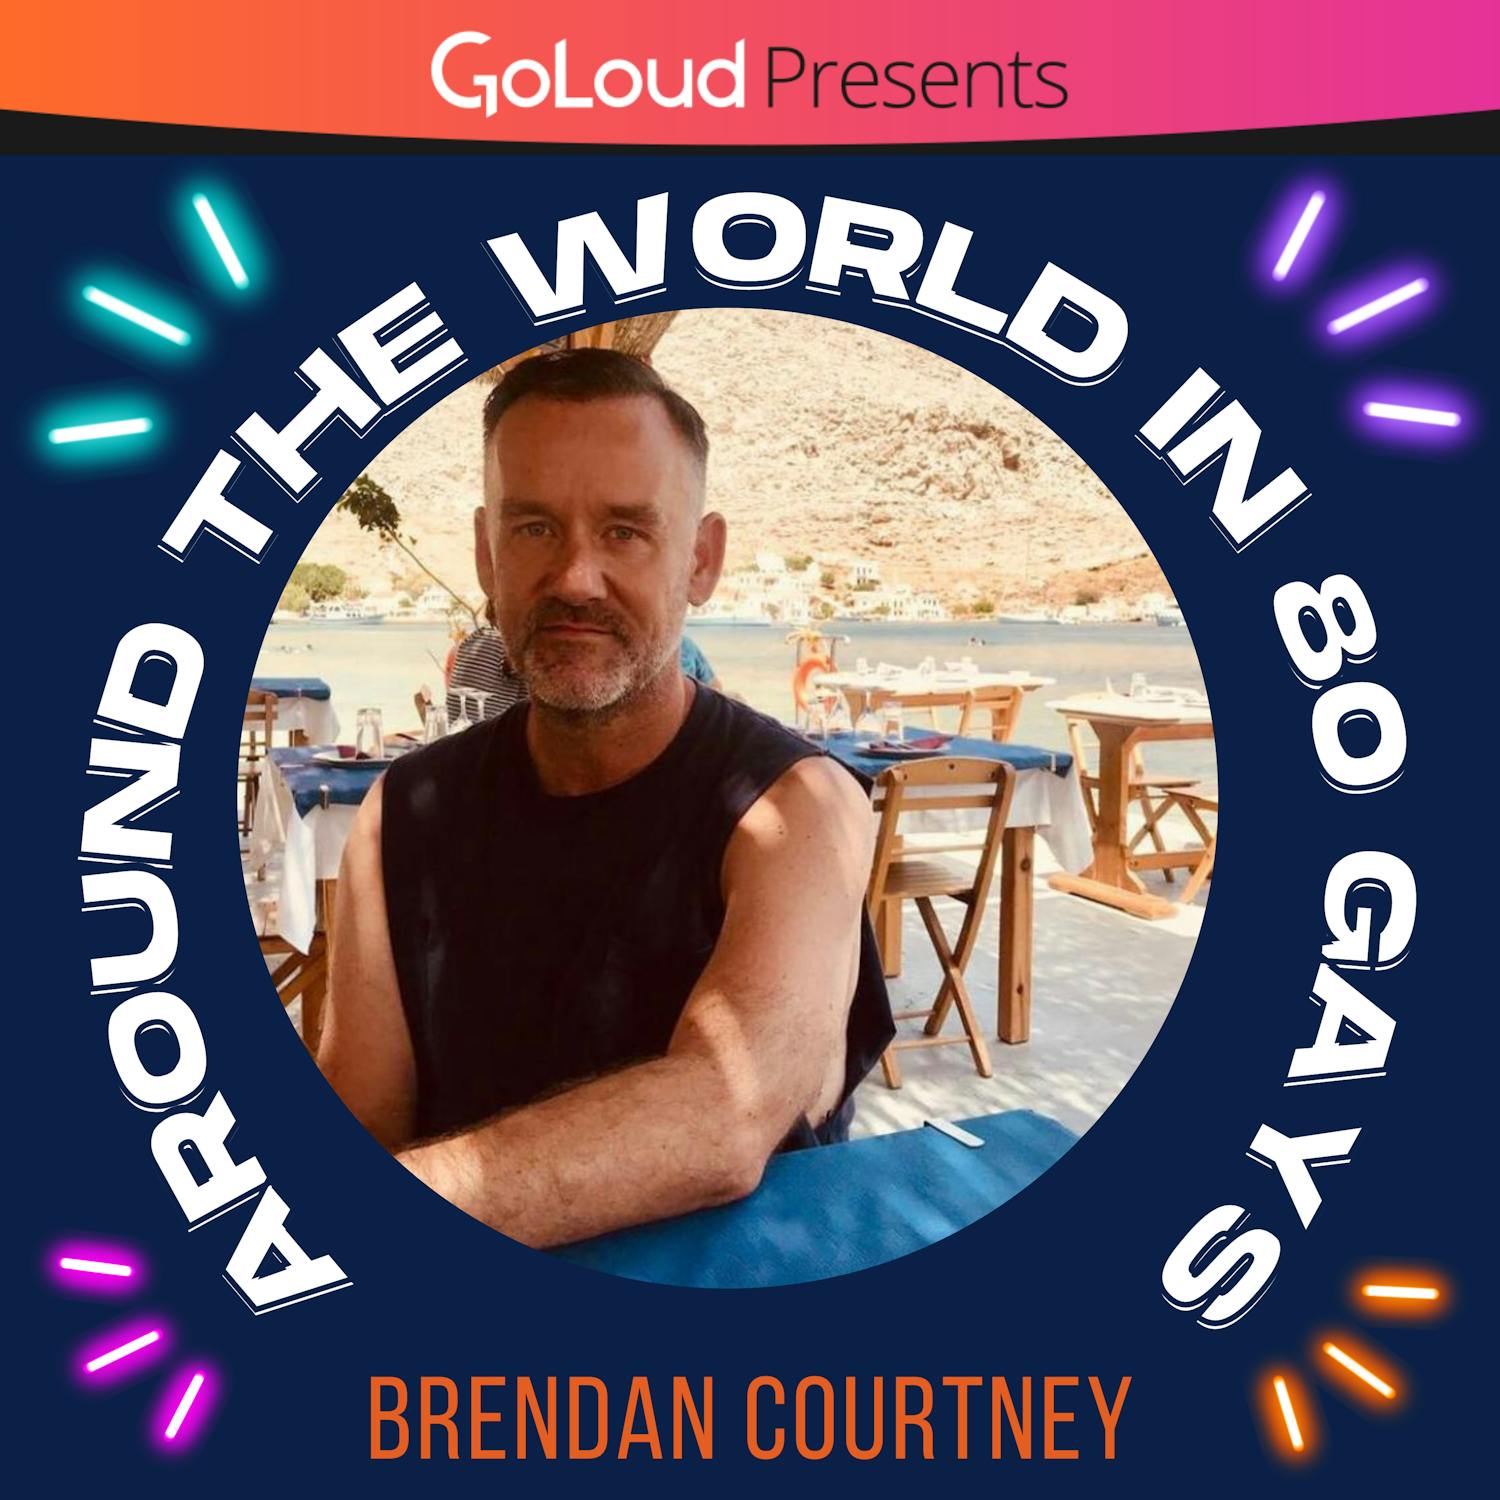 Around the World in 80 Gays meets Brendan Courtney